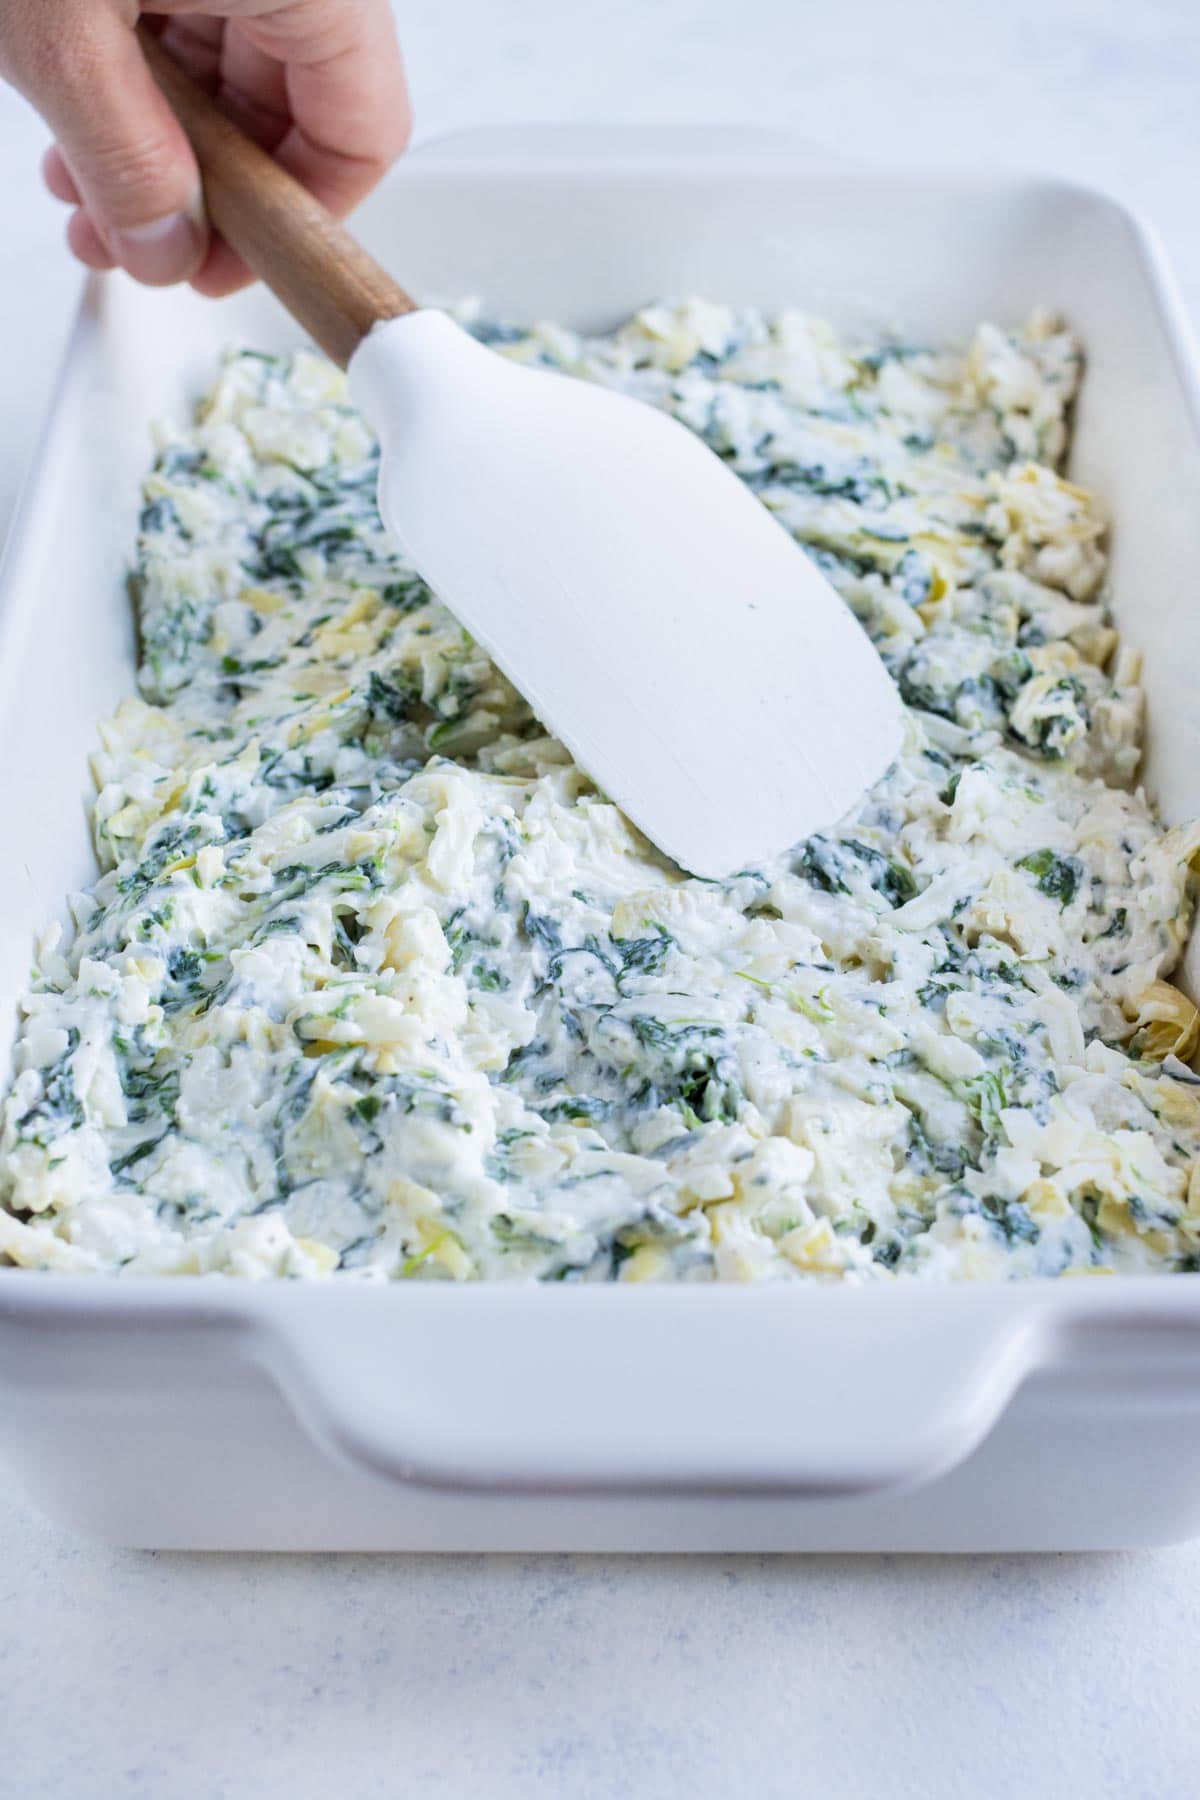 The spinach artichoke dip is spread into a baking dish.